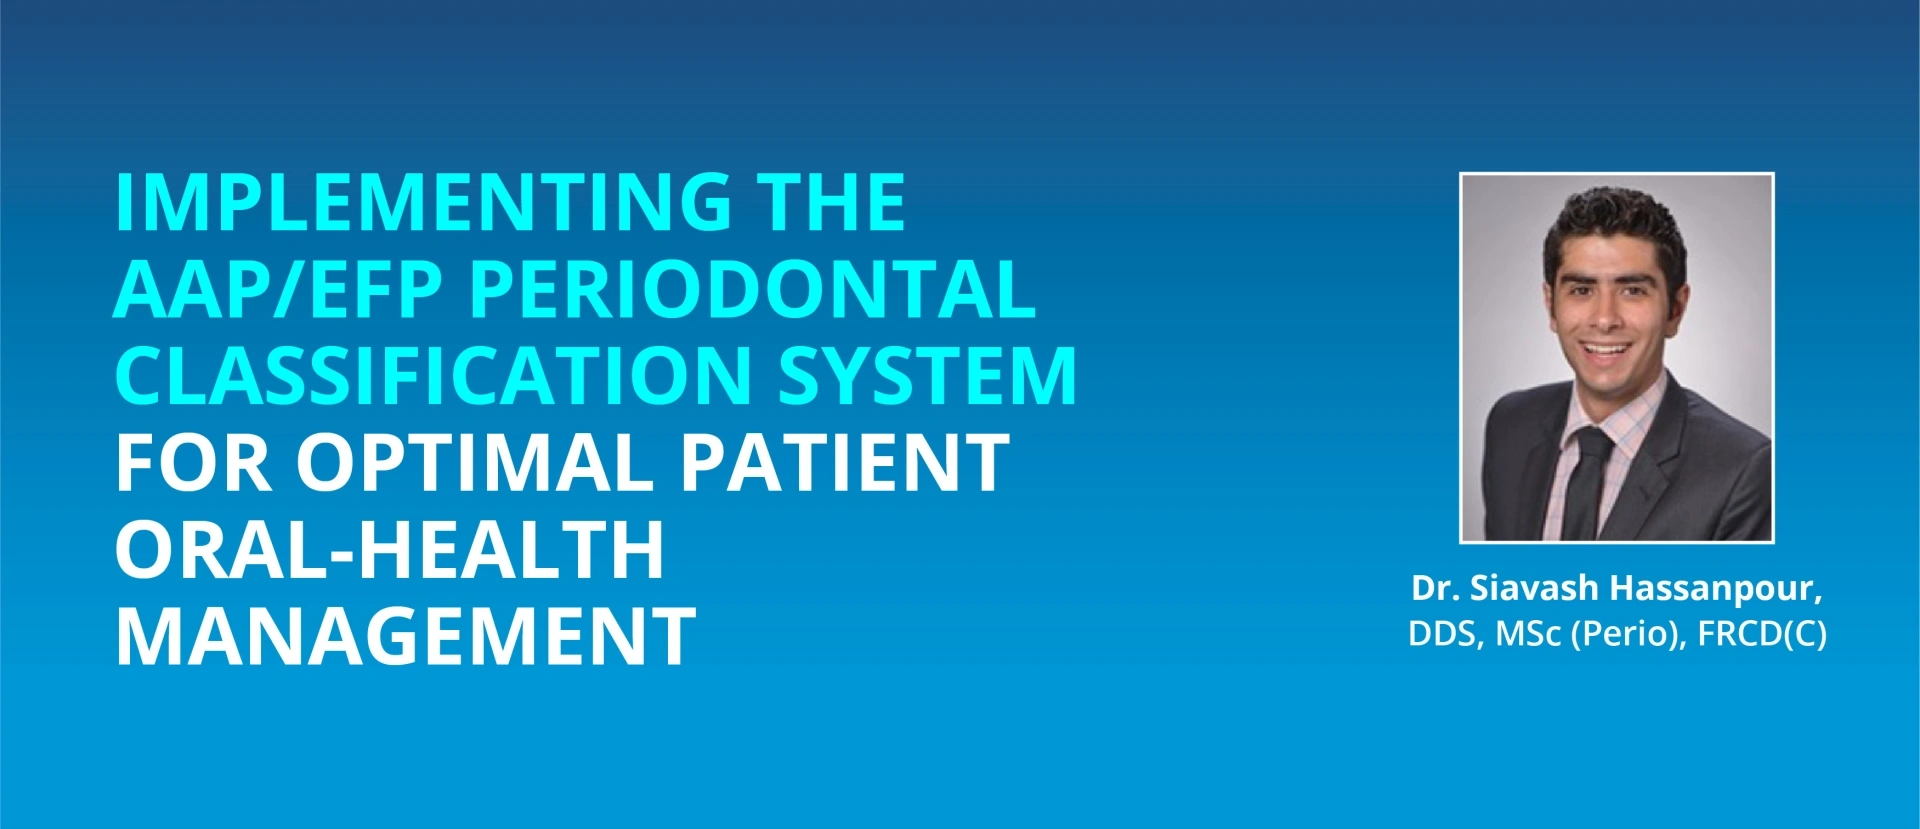 Implementing The AAP/EFP Periodontal Classification System For Optimal Patient Oral-Health Management by Dr. Siavash Hassanpour, DDS, MSc (Perio), FRCD(C)